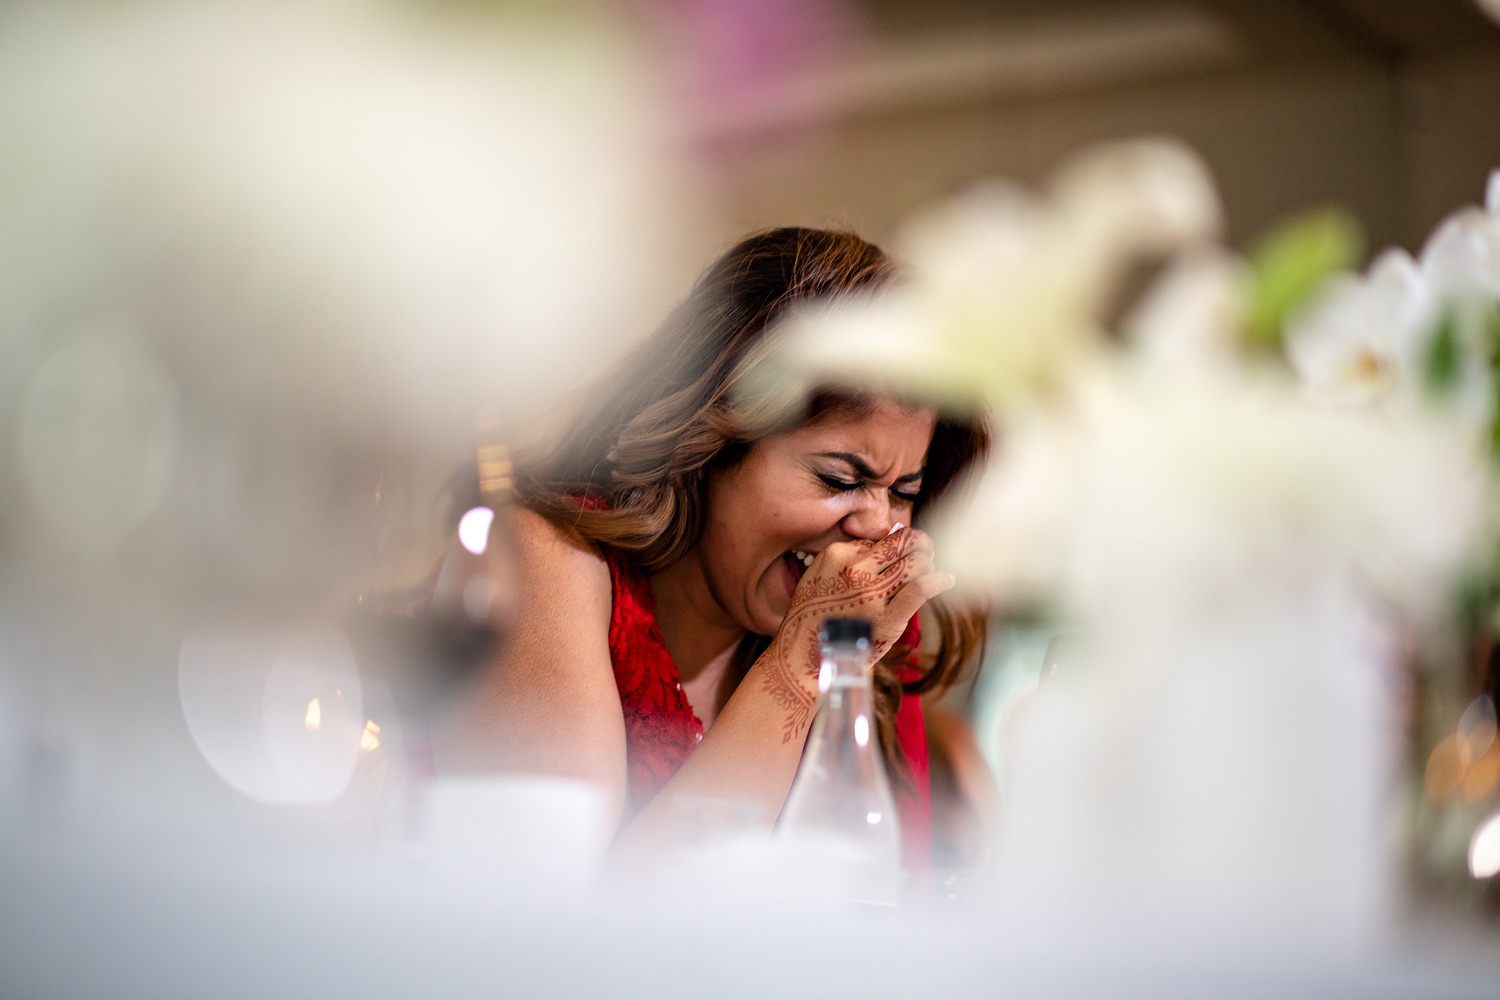 The bride laughs hysterically during speeches at her wedding